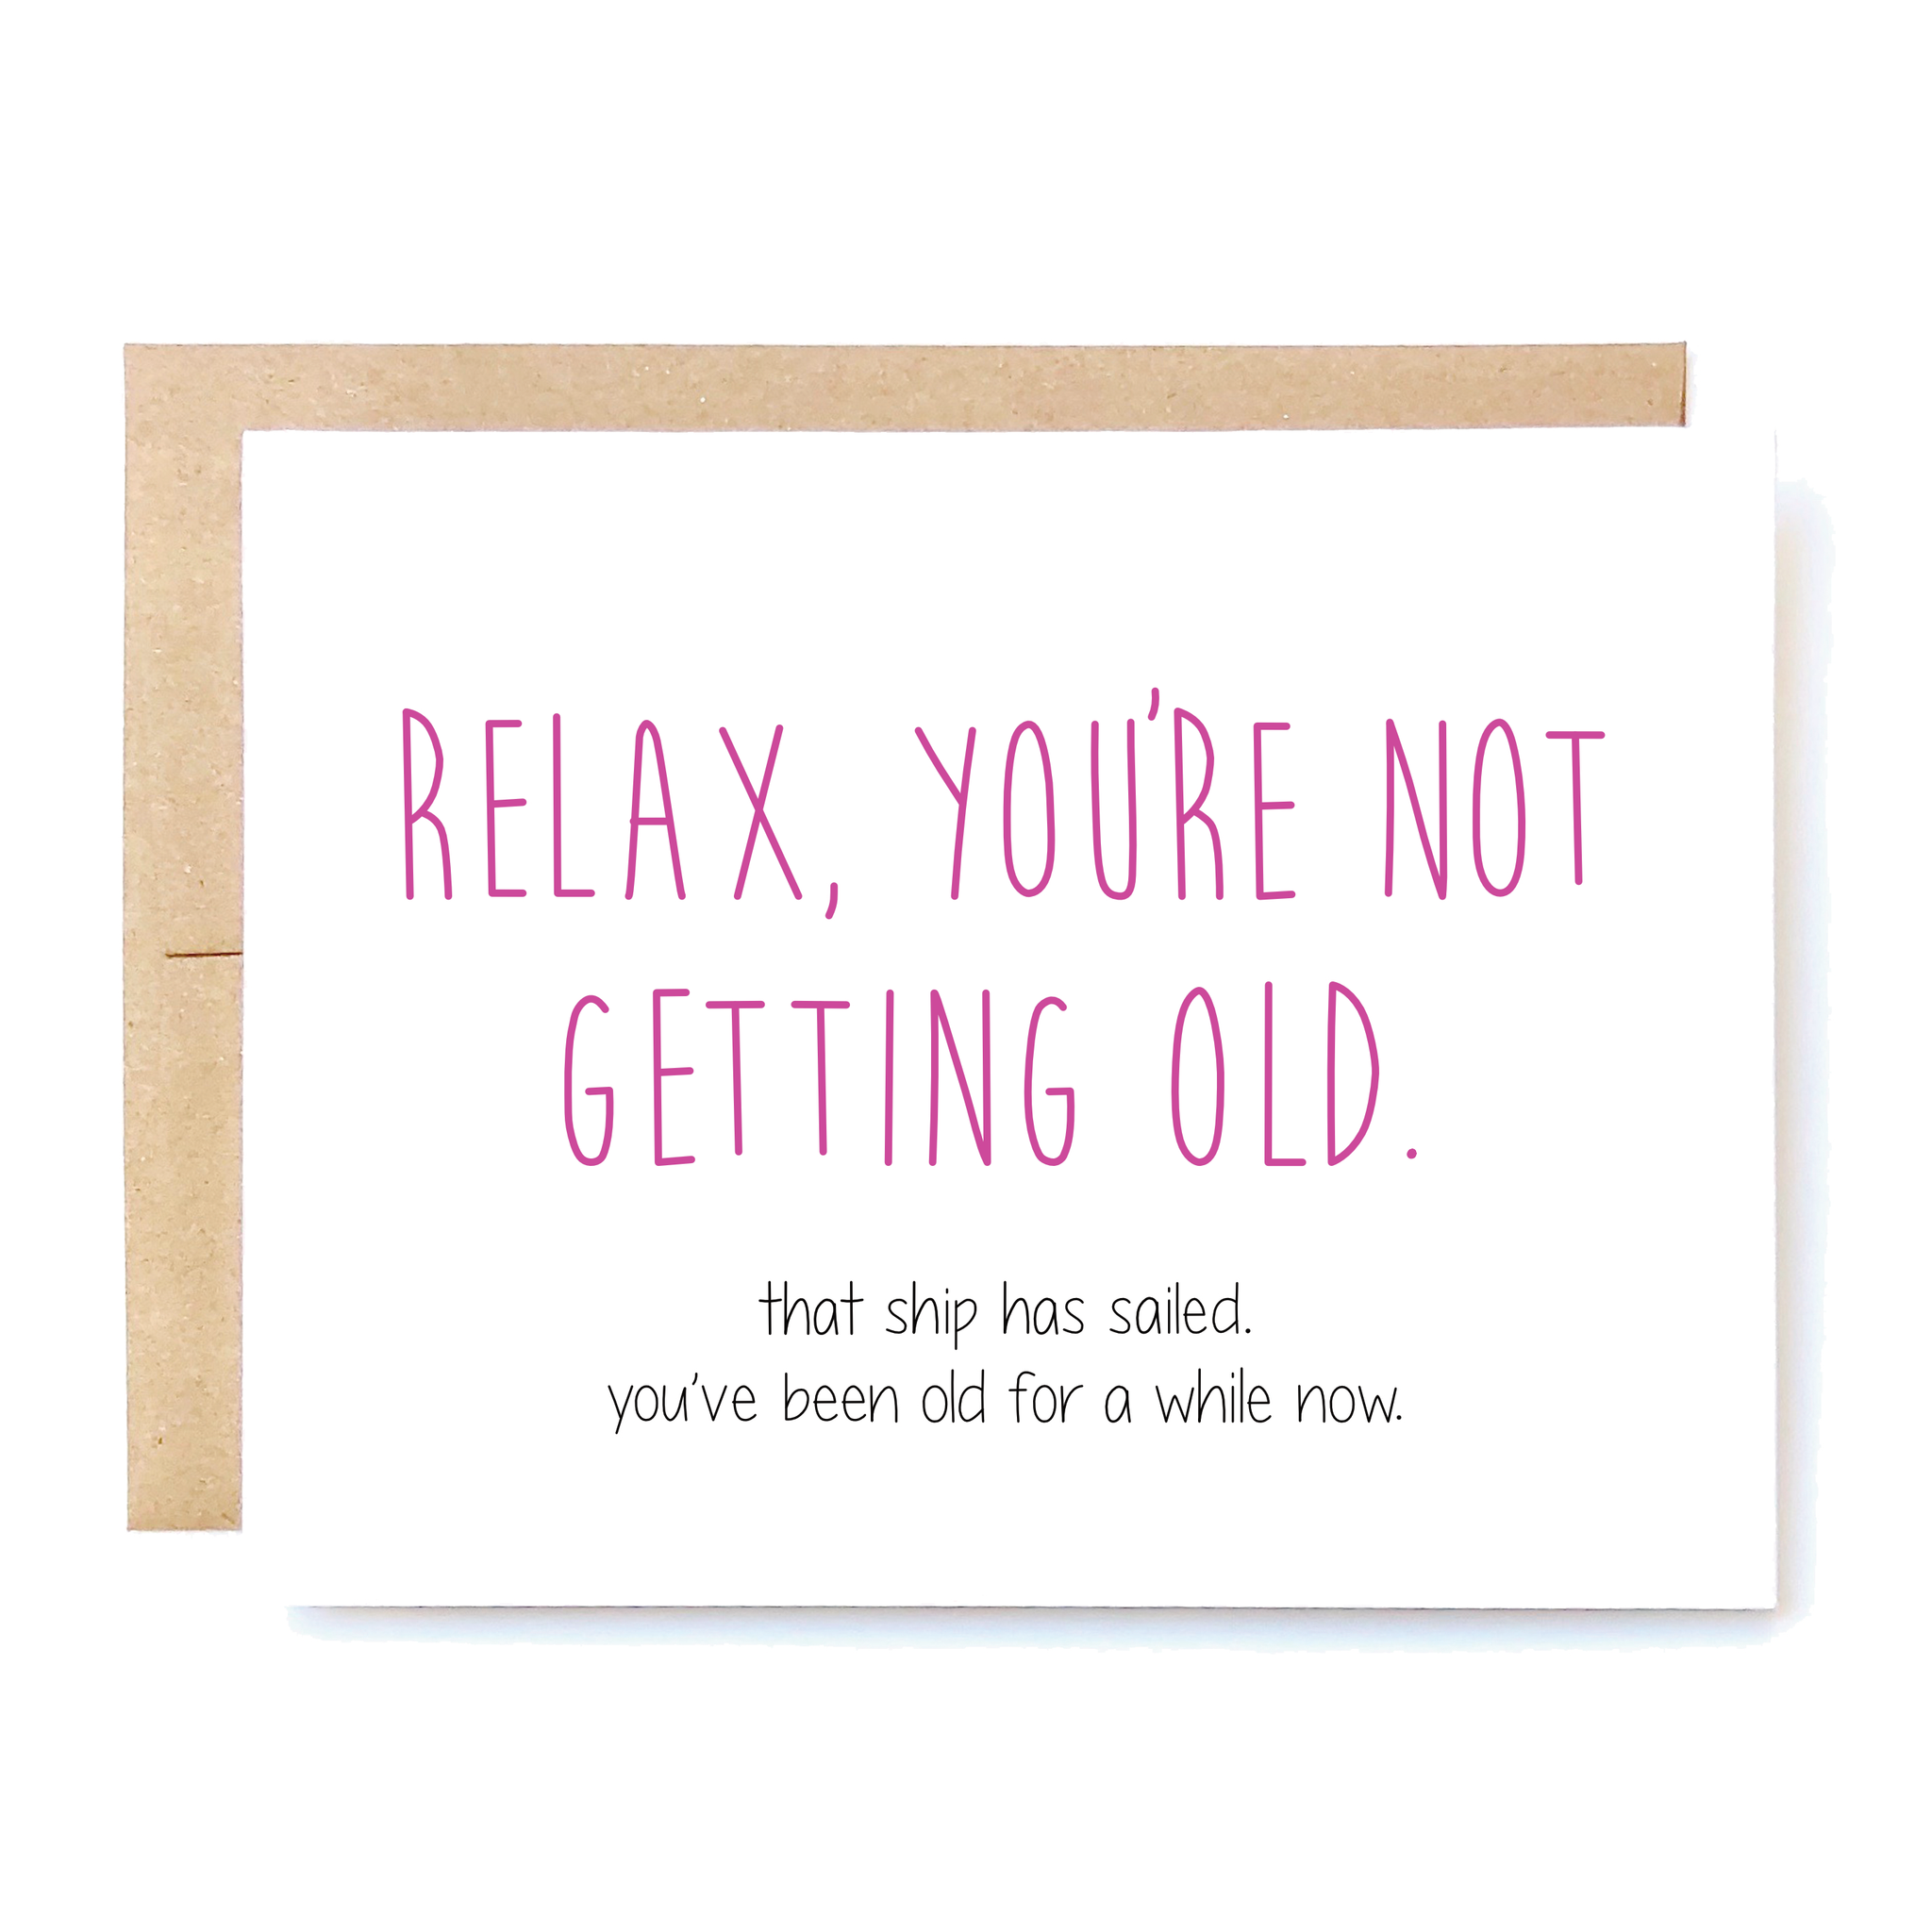 Card Front: Relax, you're not getting old. That ship has sailed. You've been old for a while now. 